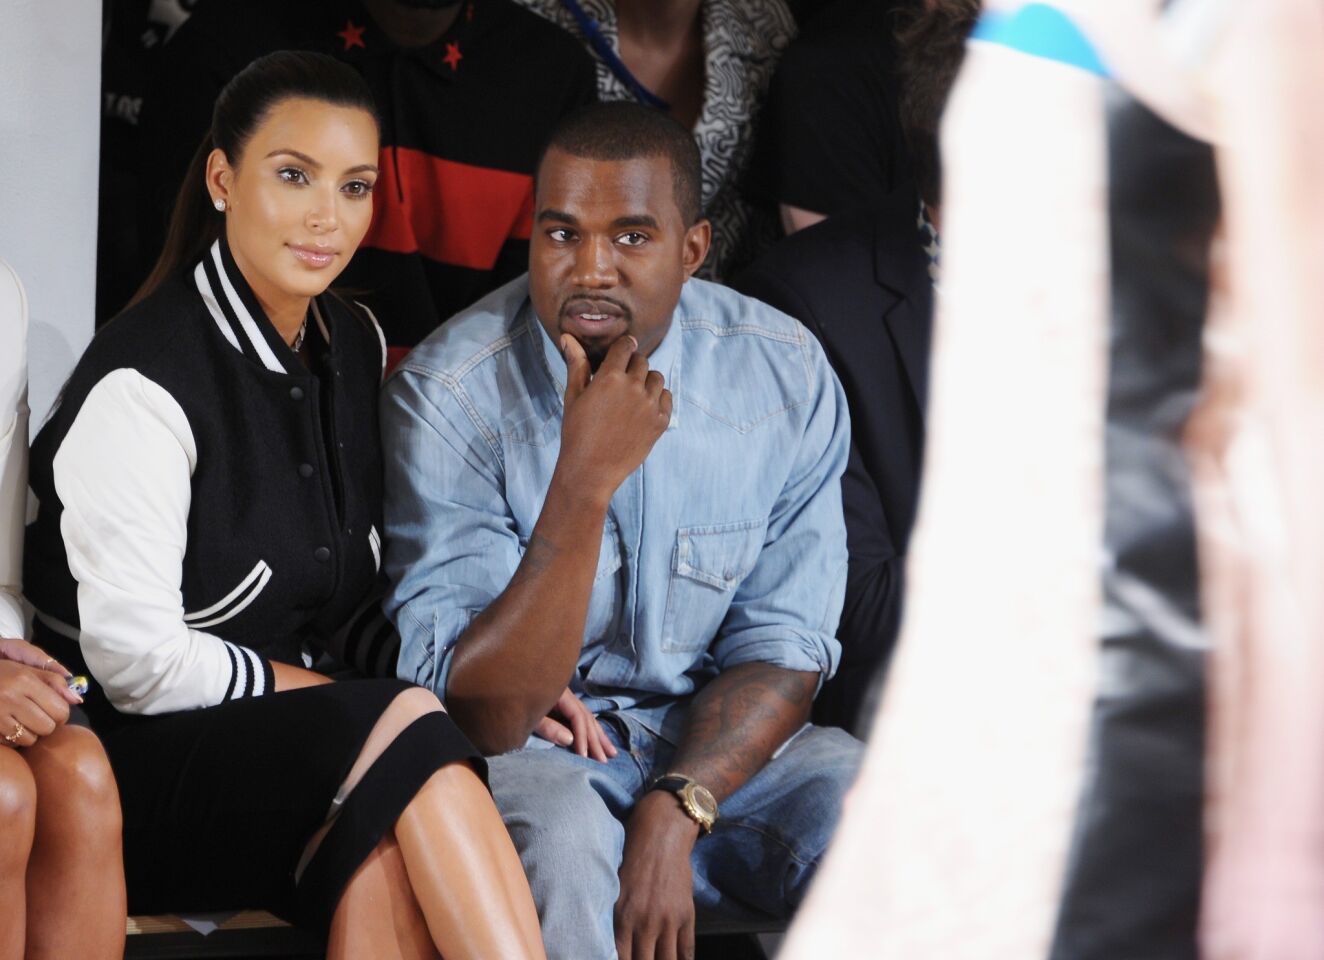 TV personality Kim Kardashian and rapper Kanye West attend the Louise Goldin spring 2013 show at Milk Studios on Sept. 12, 2012, in New York.